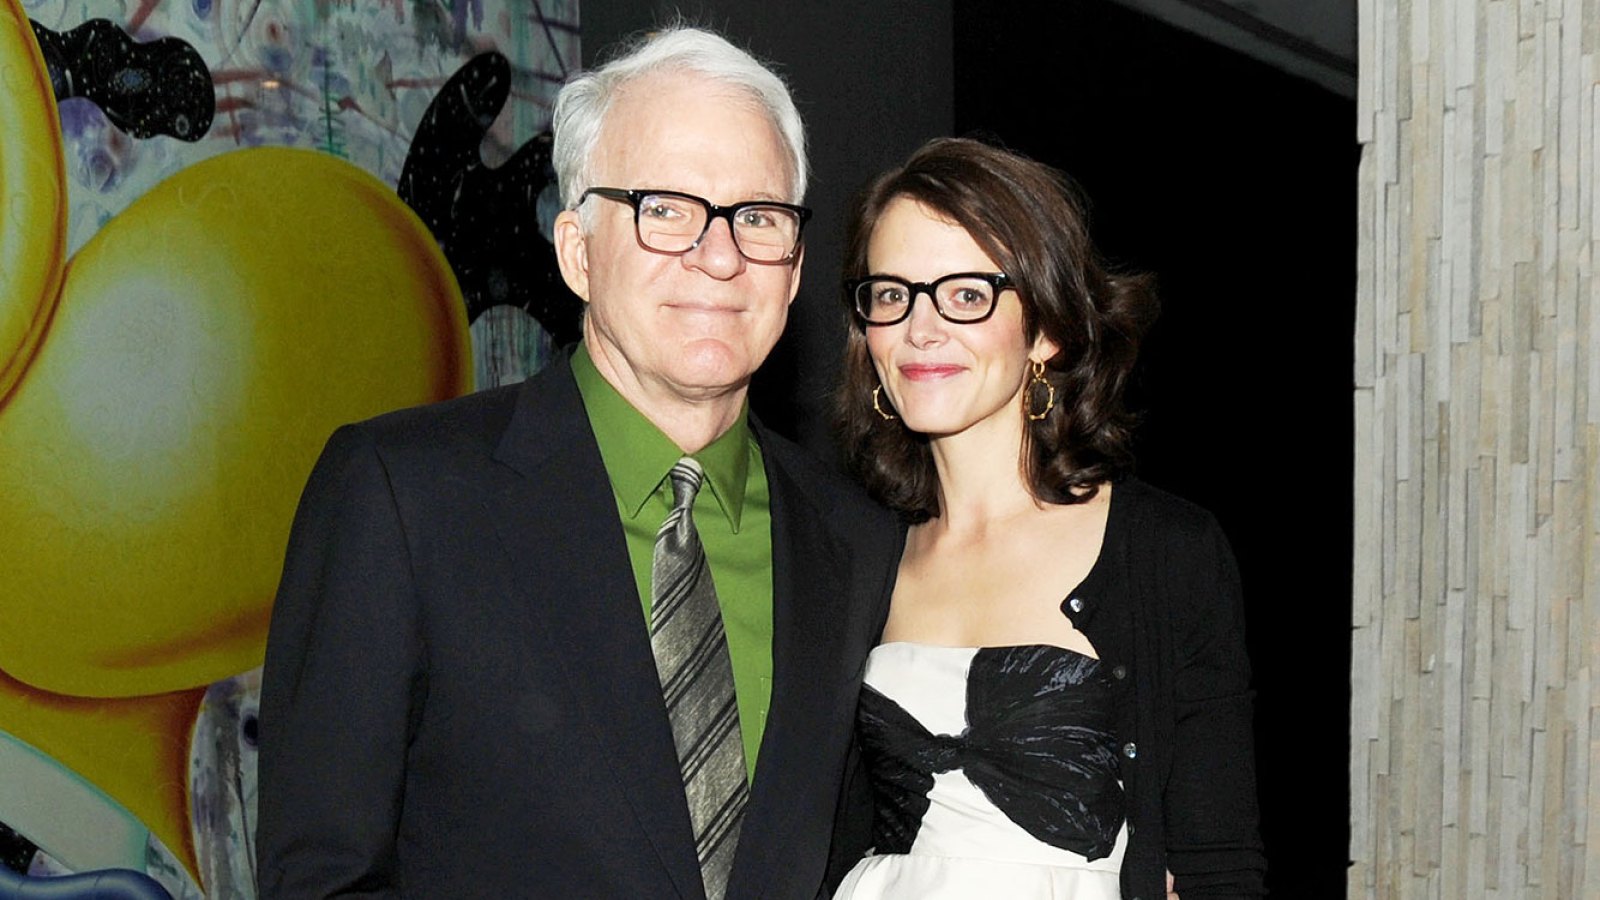 Steve Martin, 67, Becomes First-Time Dad, Wife Anne Stringfield Has Baby